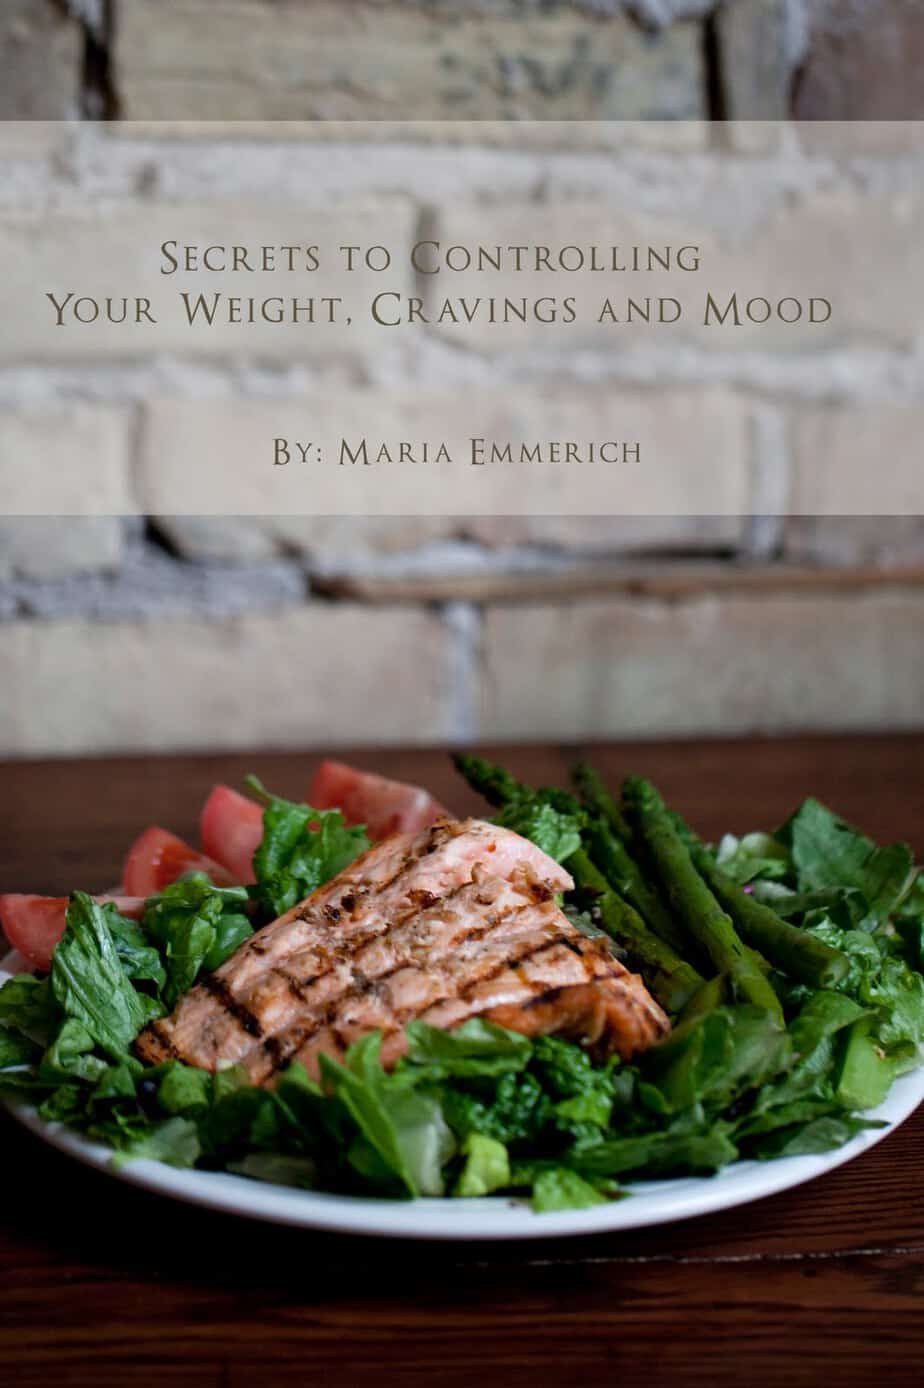 BOOK REVIEW – Secret’s to Controlling your Weight, Cravings and Mood by Maria Emmerich